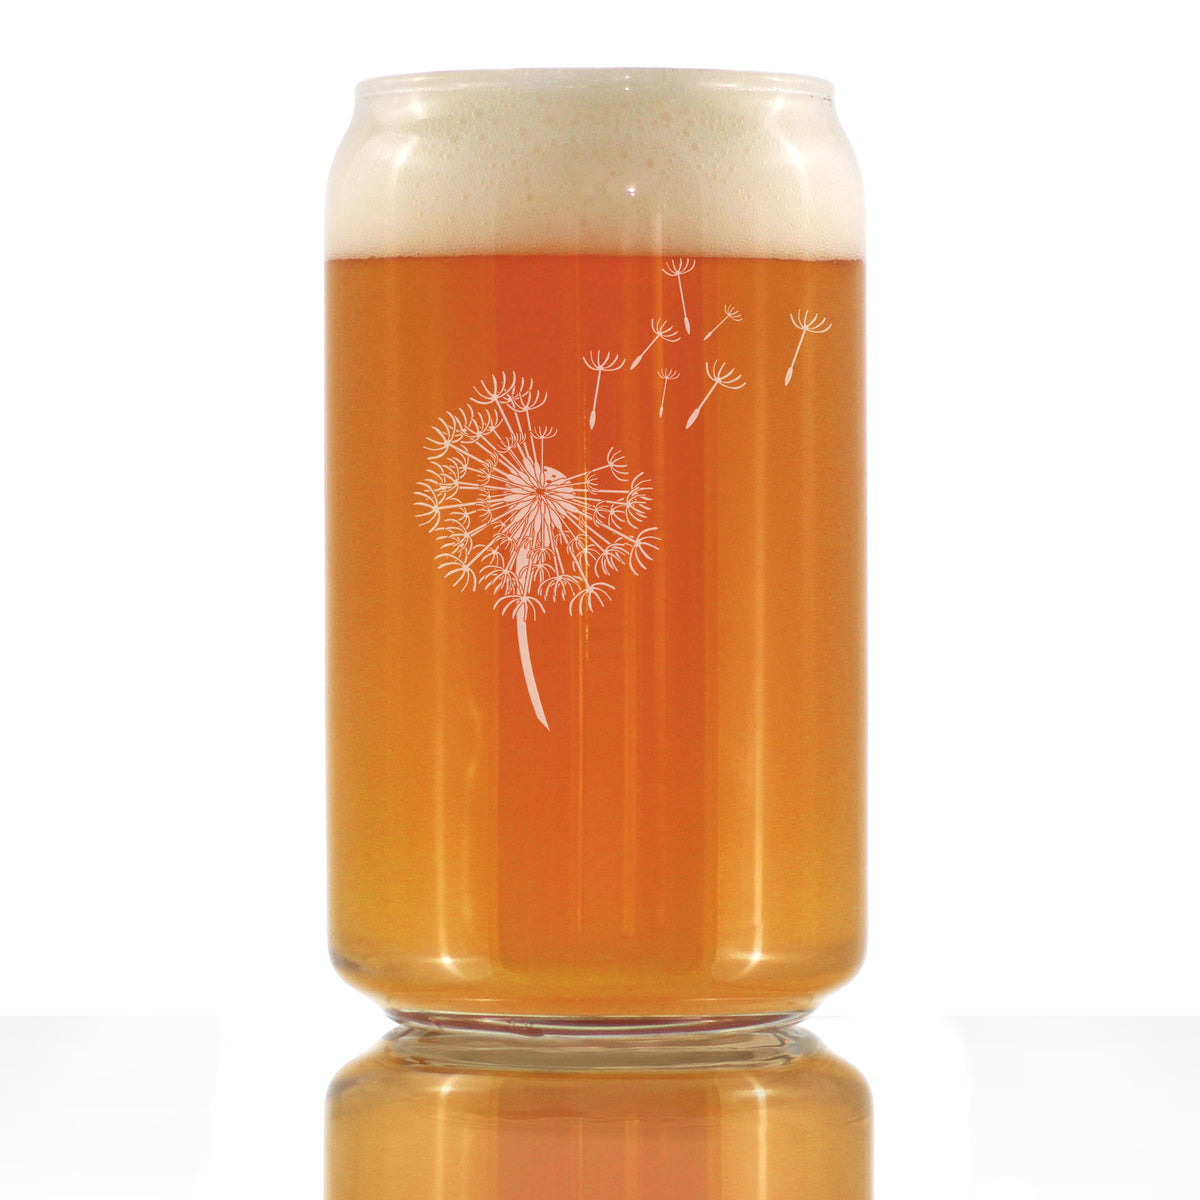 Dandelion Beer Can Pint Glass - Friendship Gifts and Dandelion Flowers Decor for New Beginnings - 16 Oz Glasses